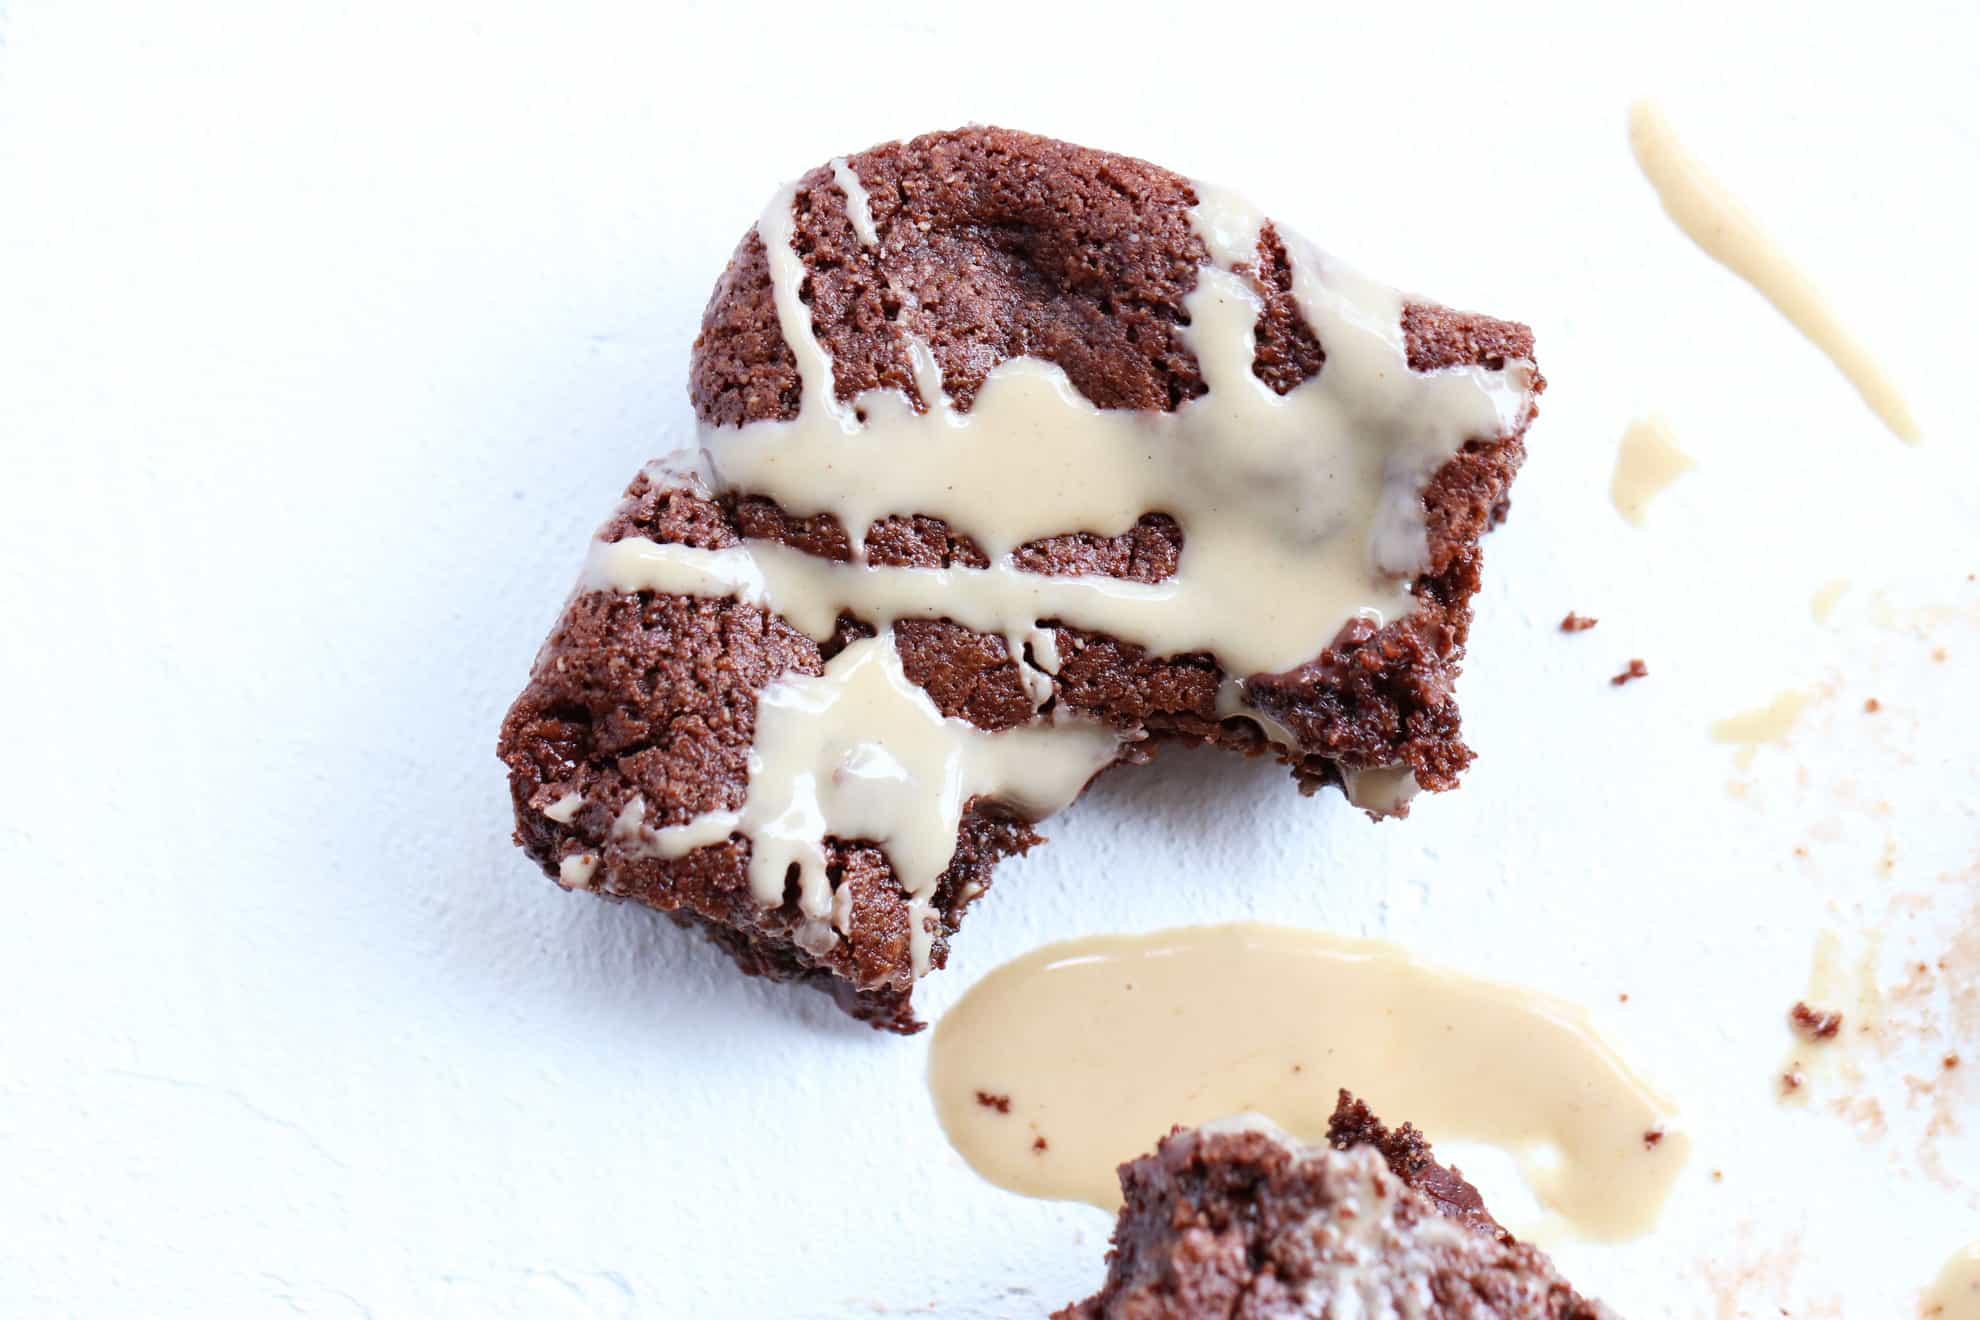 This is an overhead image of a tahini brownie with a bite taken out of it. The brownie sits on a white surface. Tahini is drizzled on the brownie and on some of the counter.